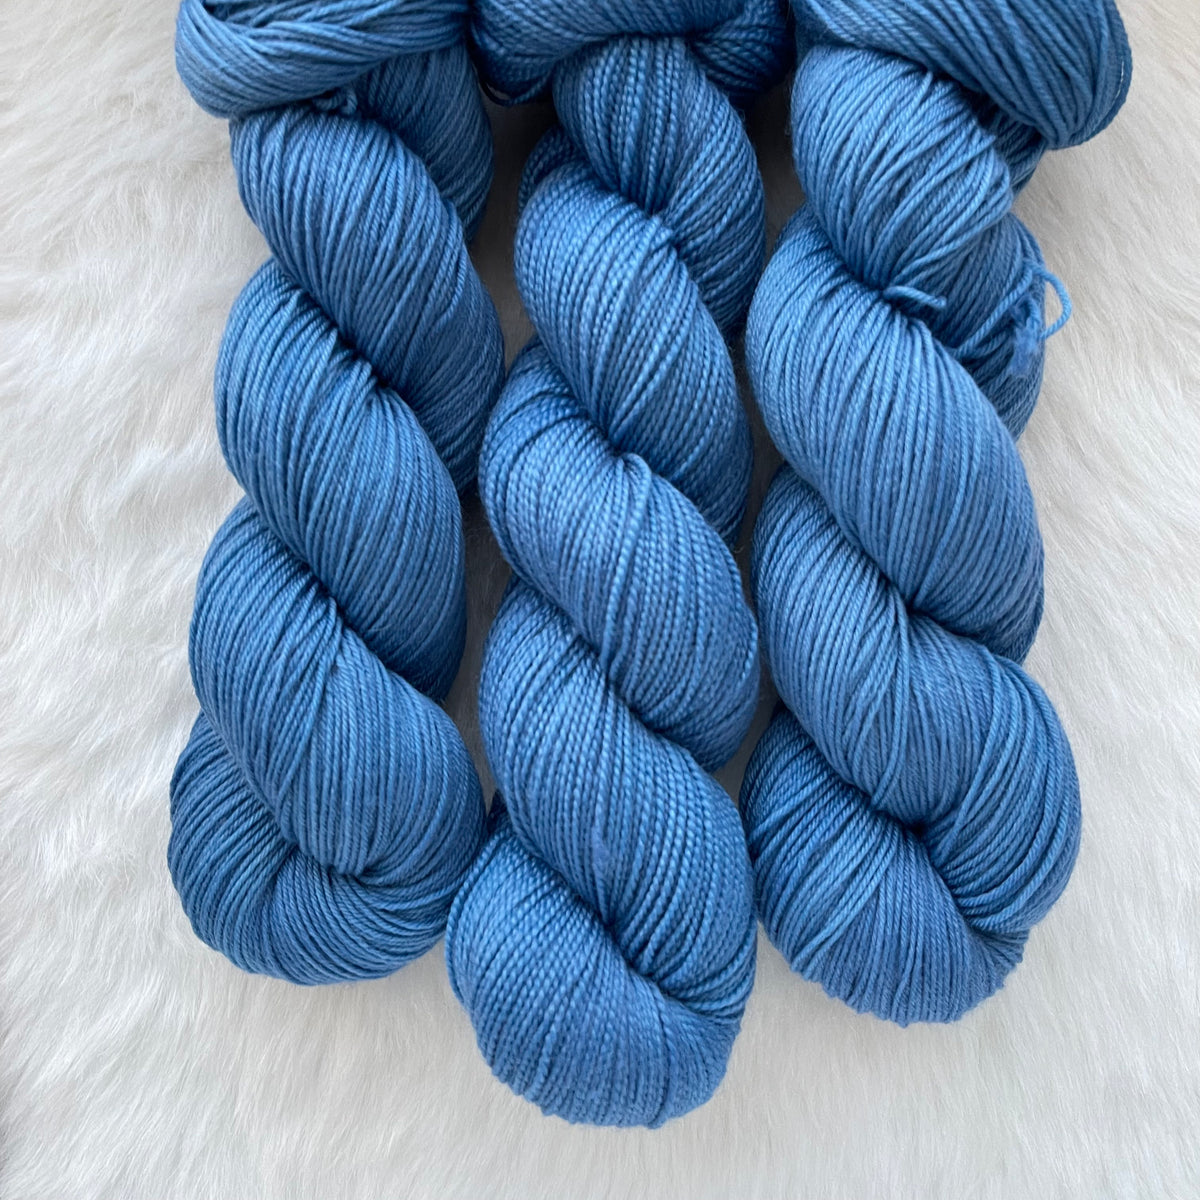 WINTER BLUES - Dyed to Order - Hand Dyed Yarn Skein